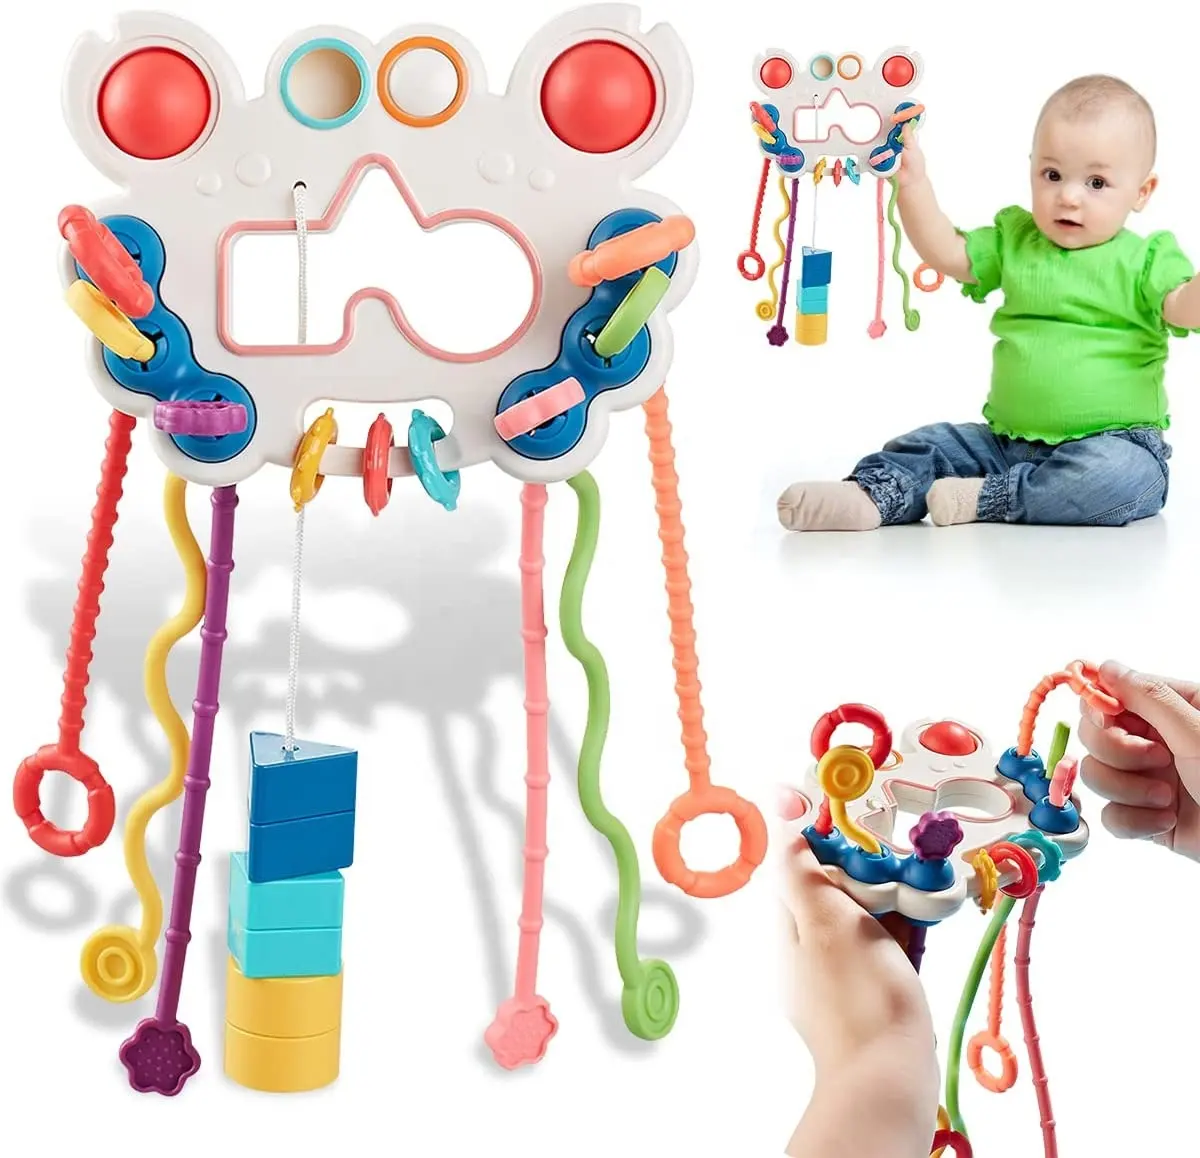 Montessori Silicone Pull String Toys Food Grade Pull String Toy Sensory Magic Balls for Motor Skills Infants Toddlers